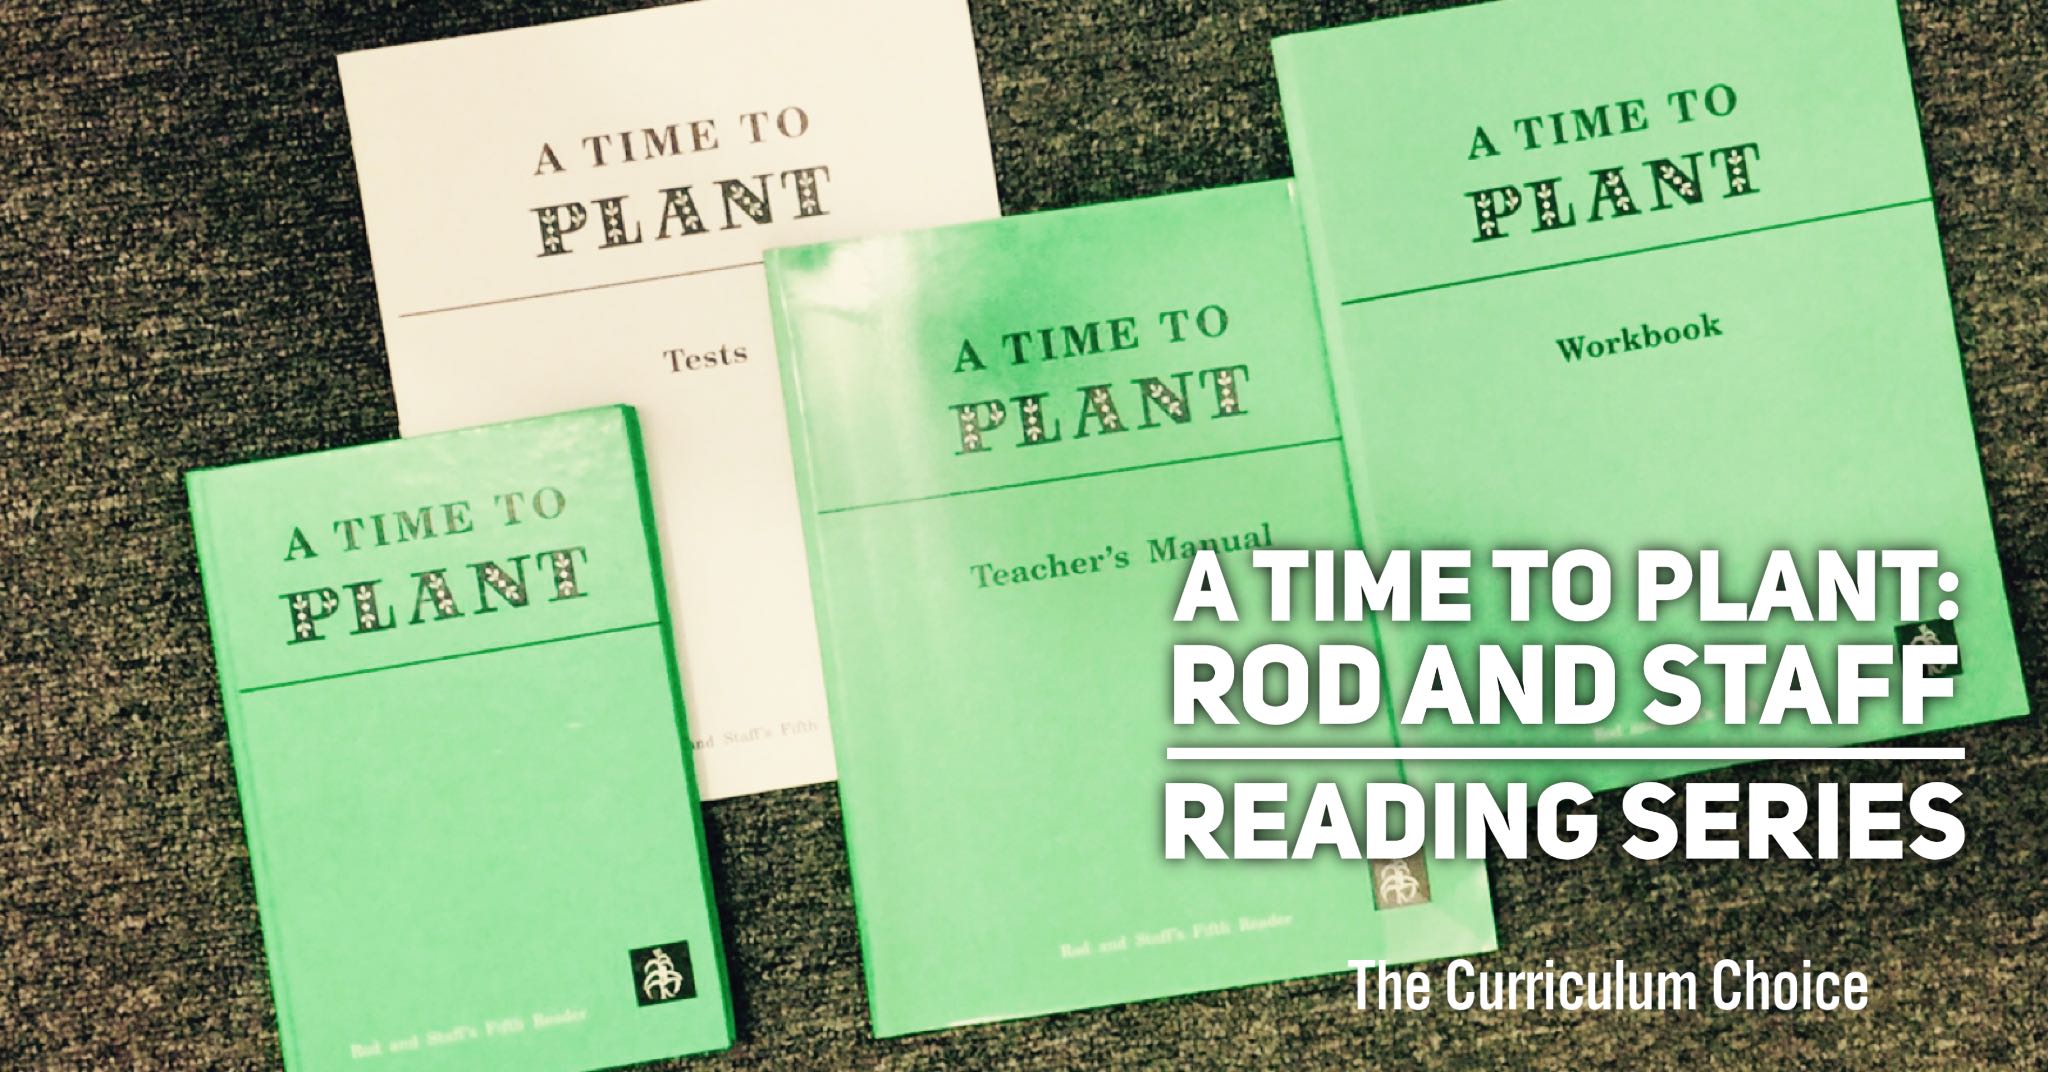 A Time to Plant: Rod and Staff Reading Series